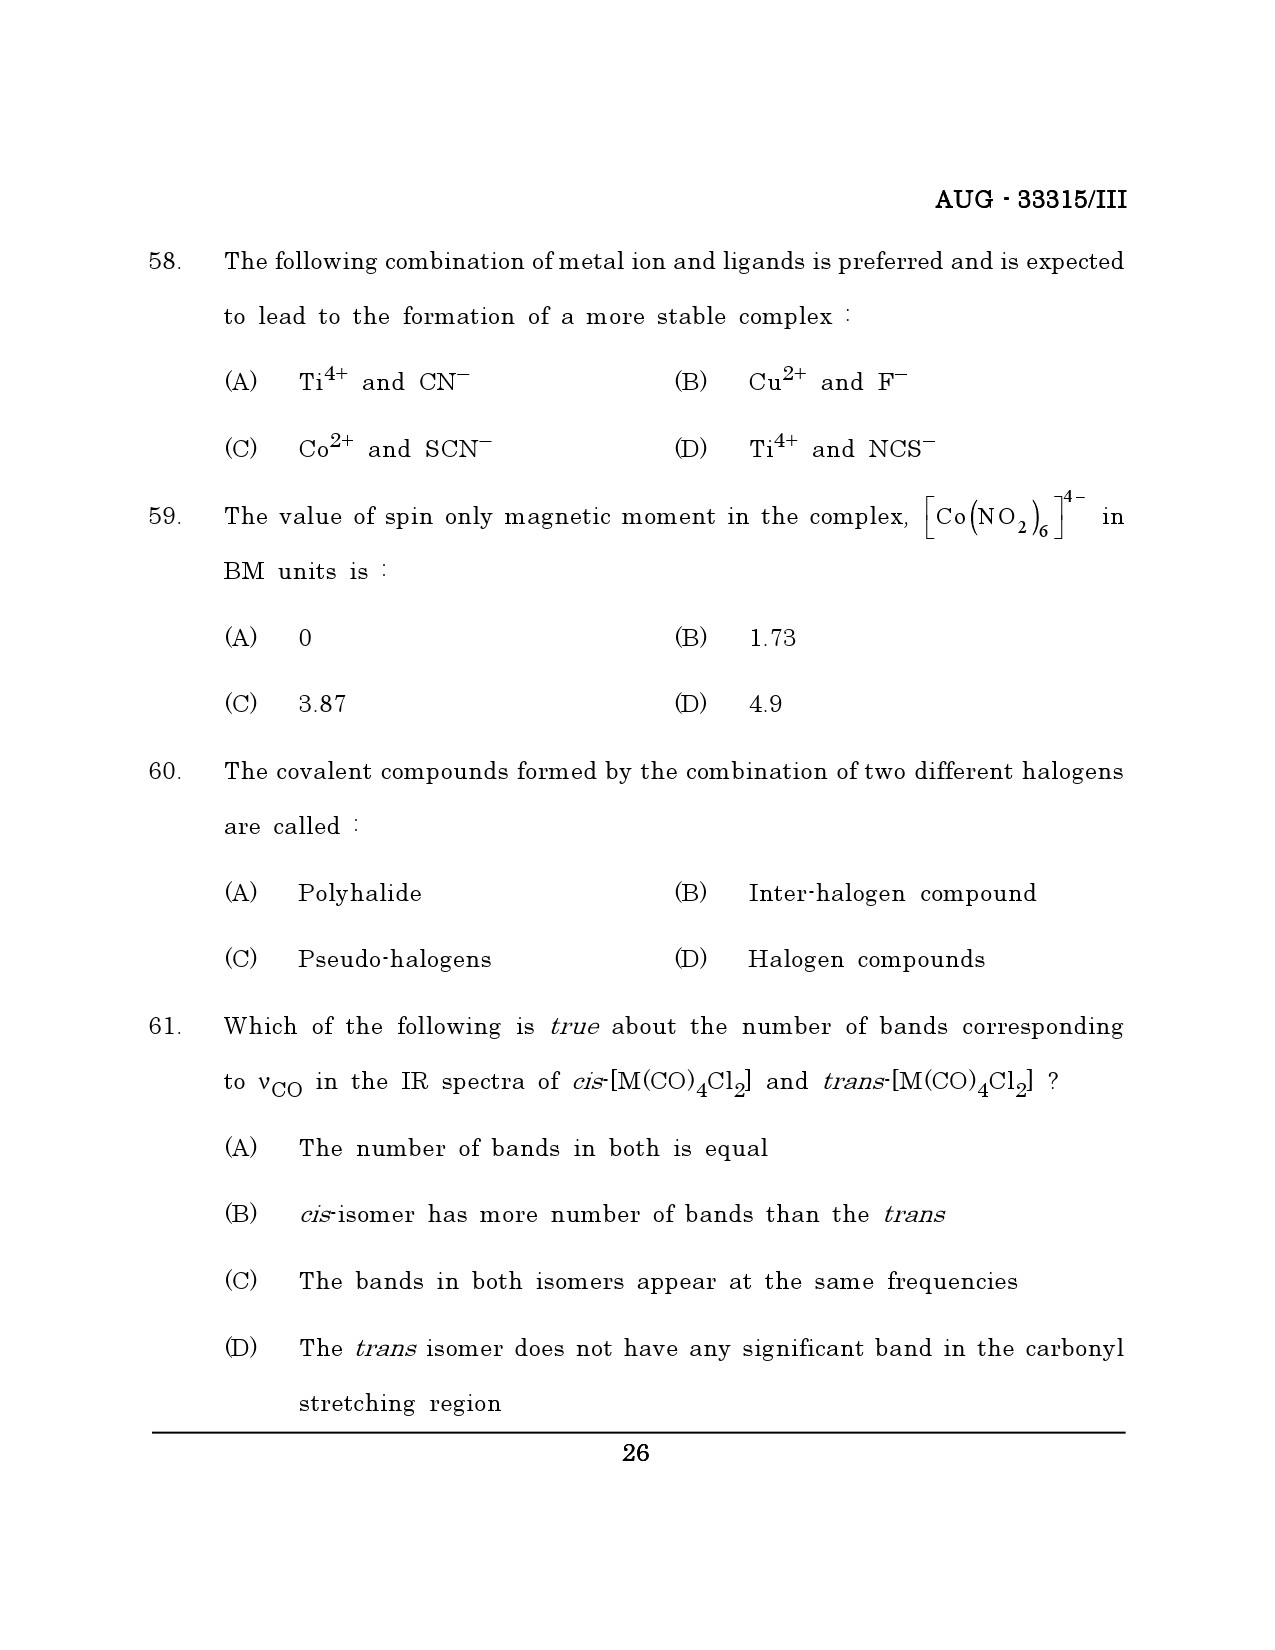 Maharashtra SET Chemical Sciences Question Paper III August 2015 25